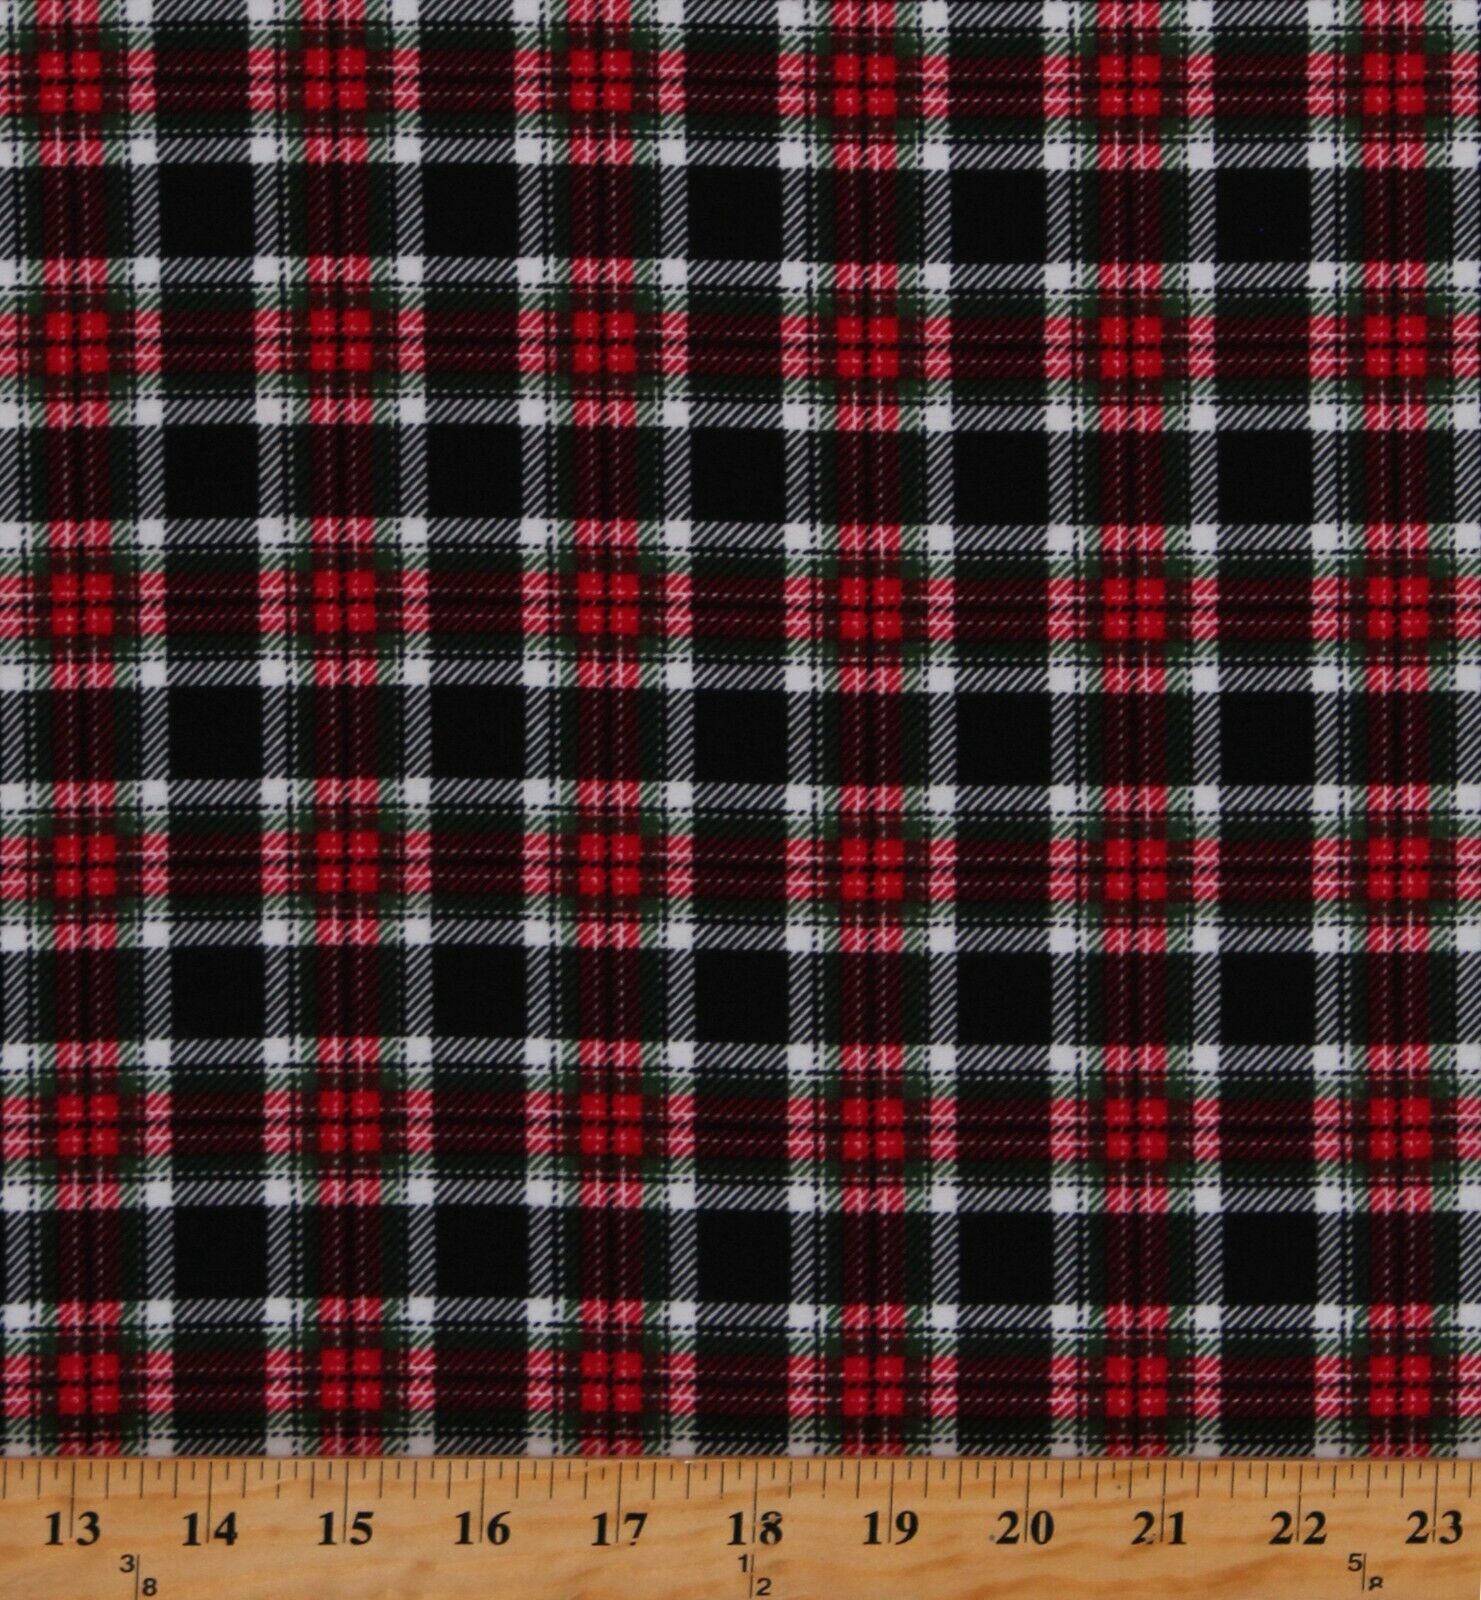 GCP Products Flannel Plaid Black Red Green White Christmas Holiday Flannel Fabric Bty D277.15